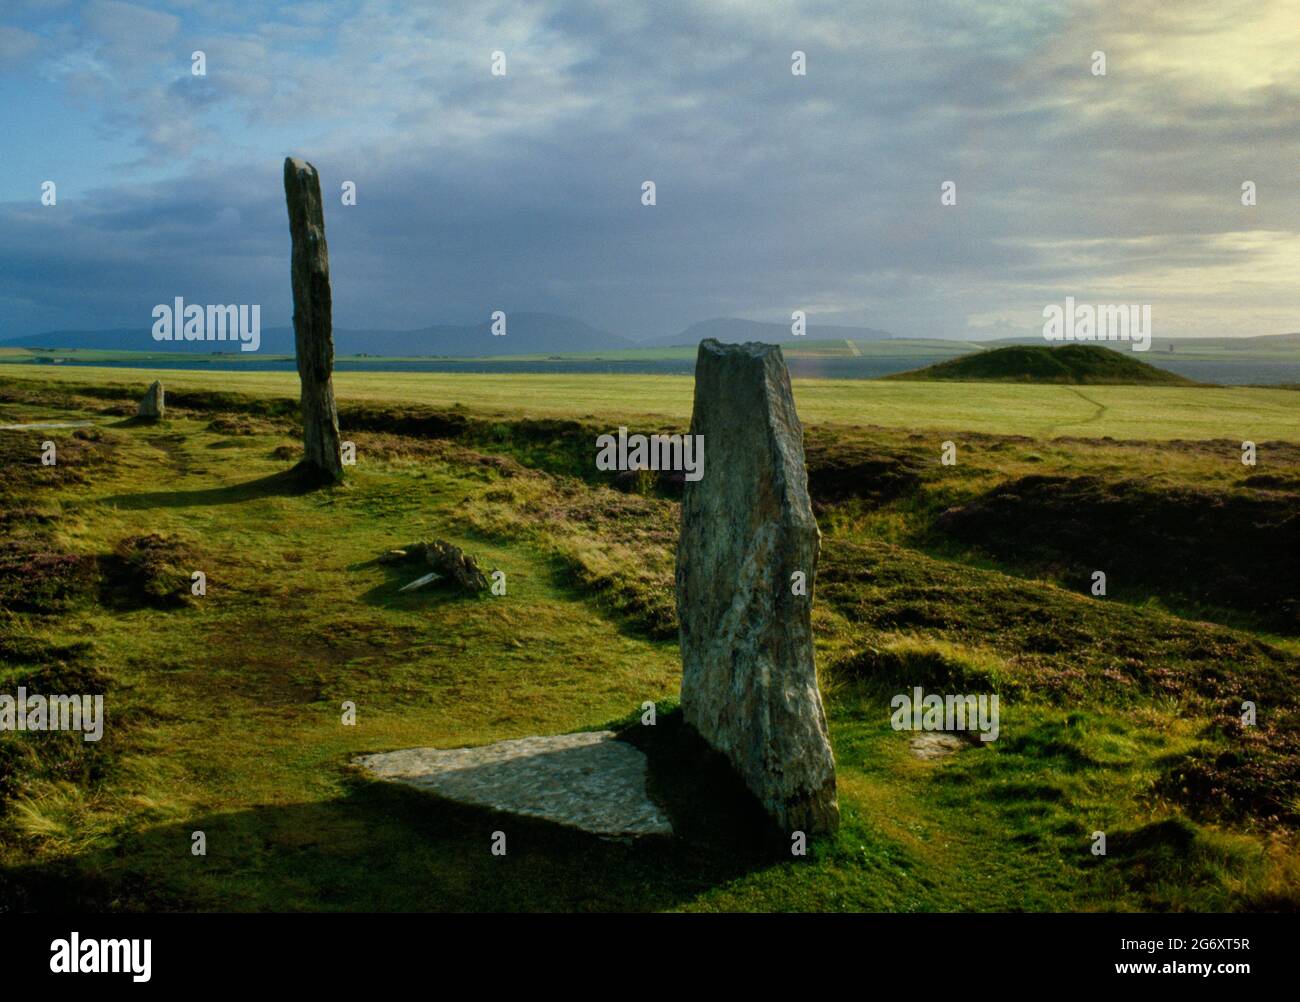 The Ring of Brodgar (Brogar) stone circle & henge monument on the Ness of Brodgar, Mainland, Orkney. Looking SW across the henge ditch to Salt Knowe. Stock Photo